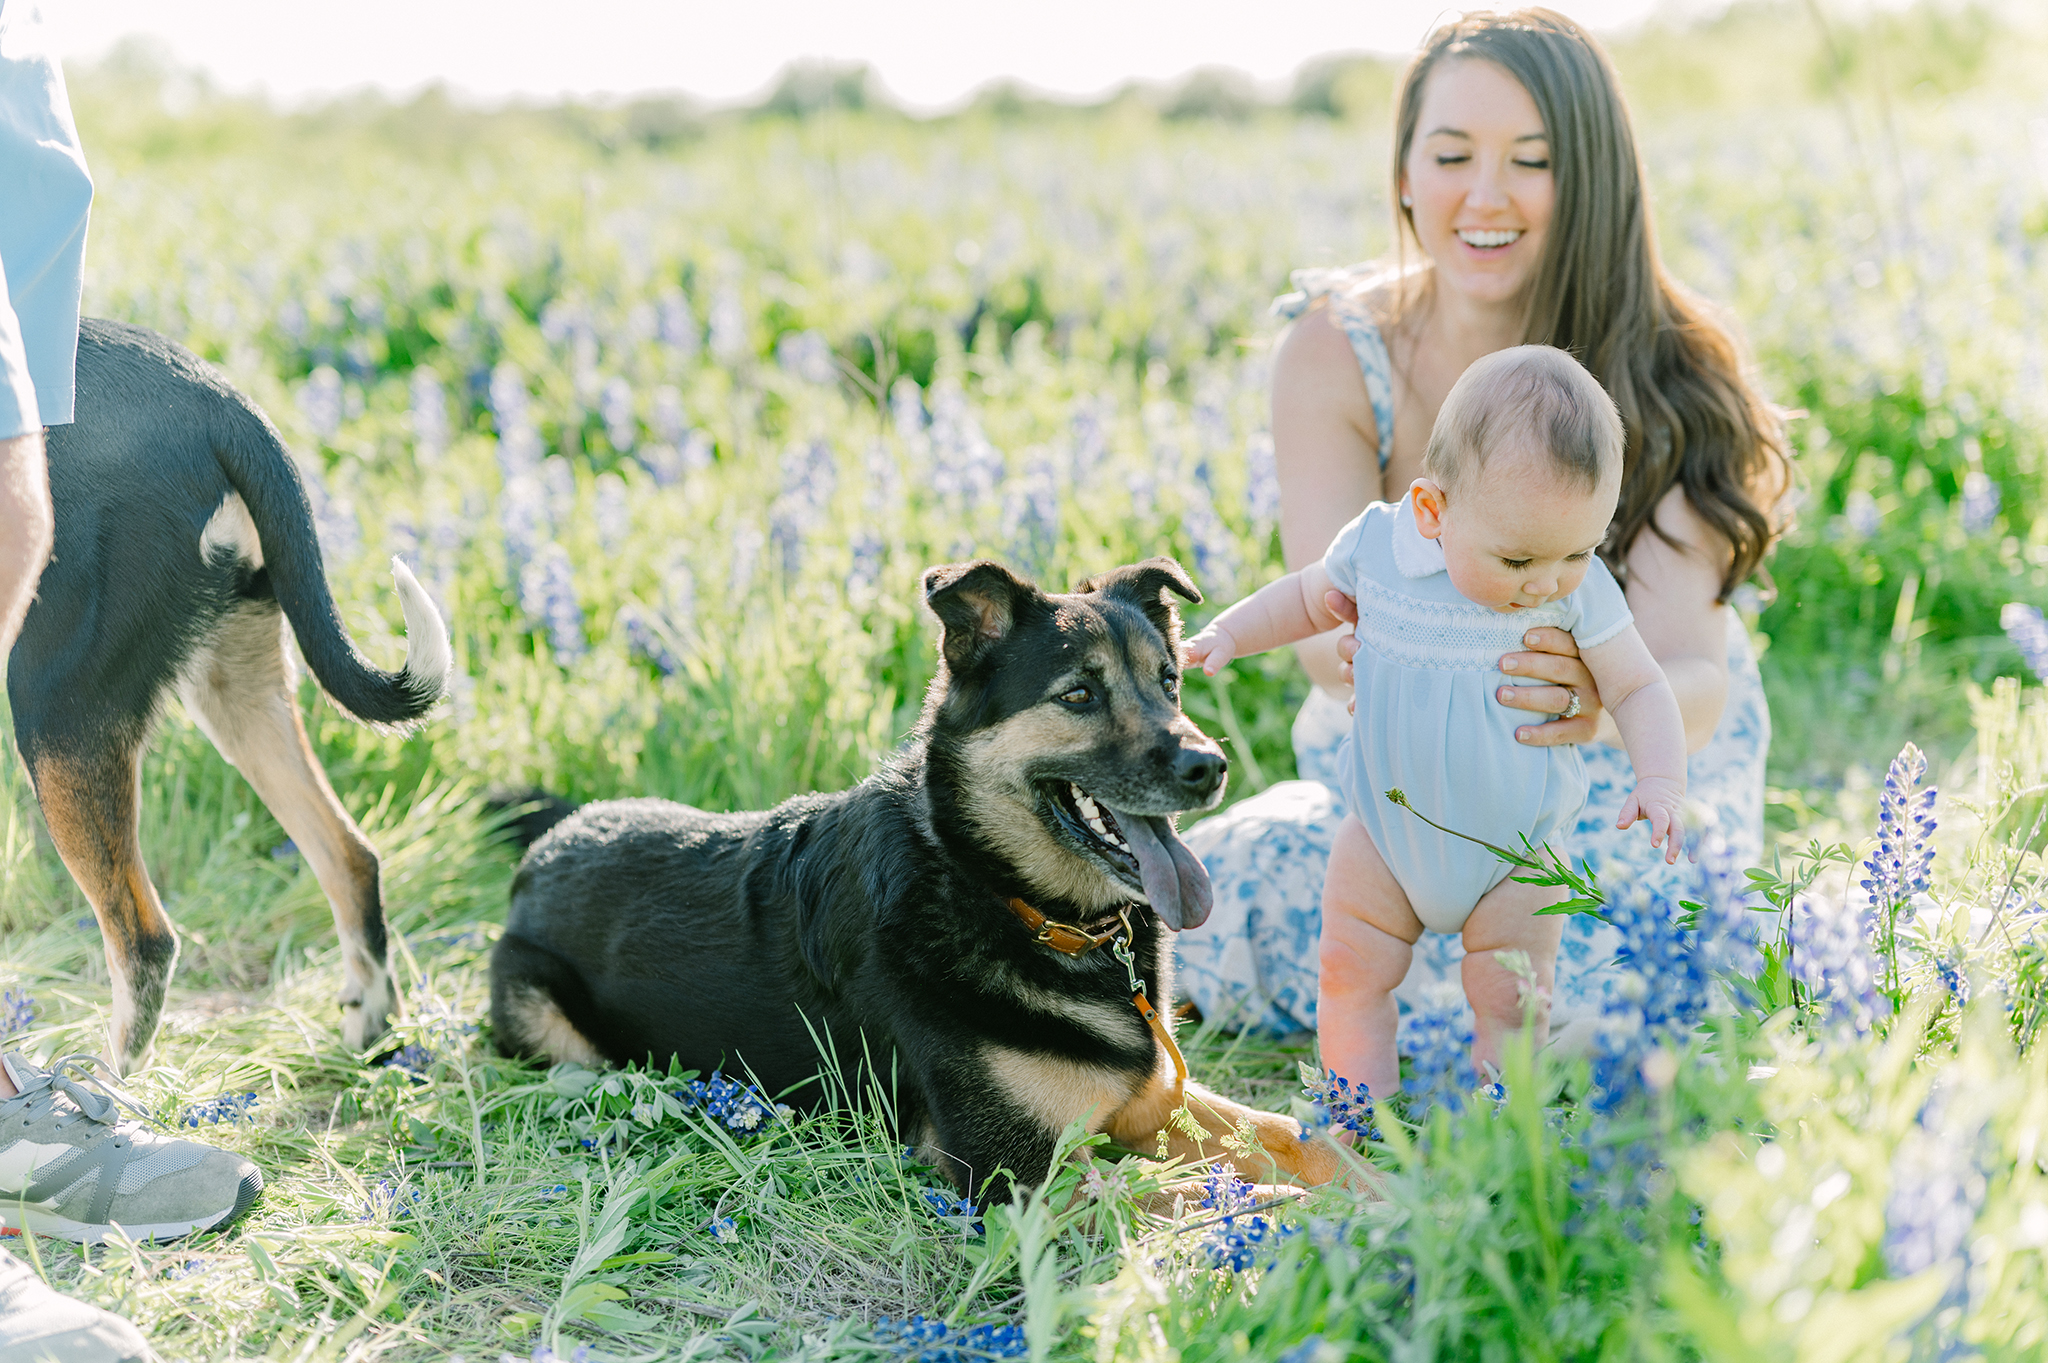 Mother sitting in a field with her baby and puppy using Pottery Barn Kids accessories.